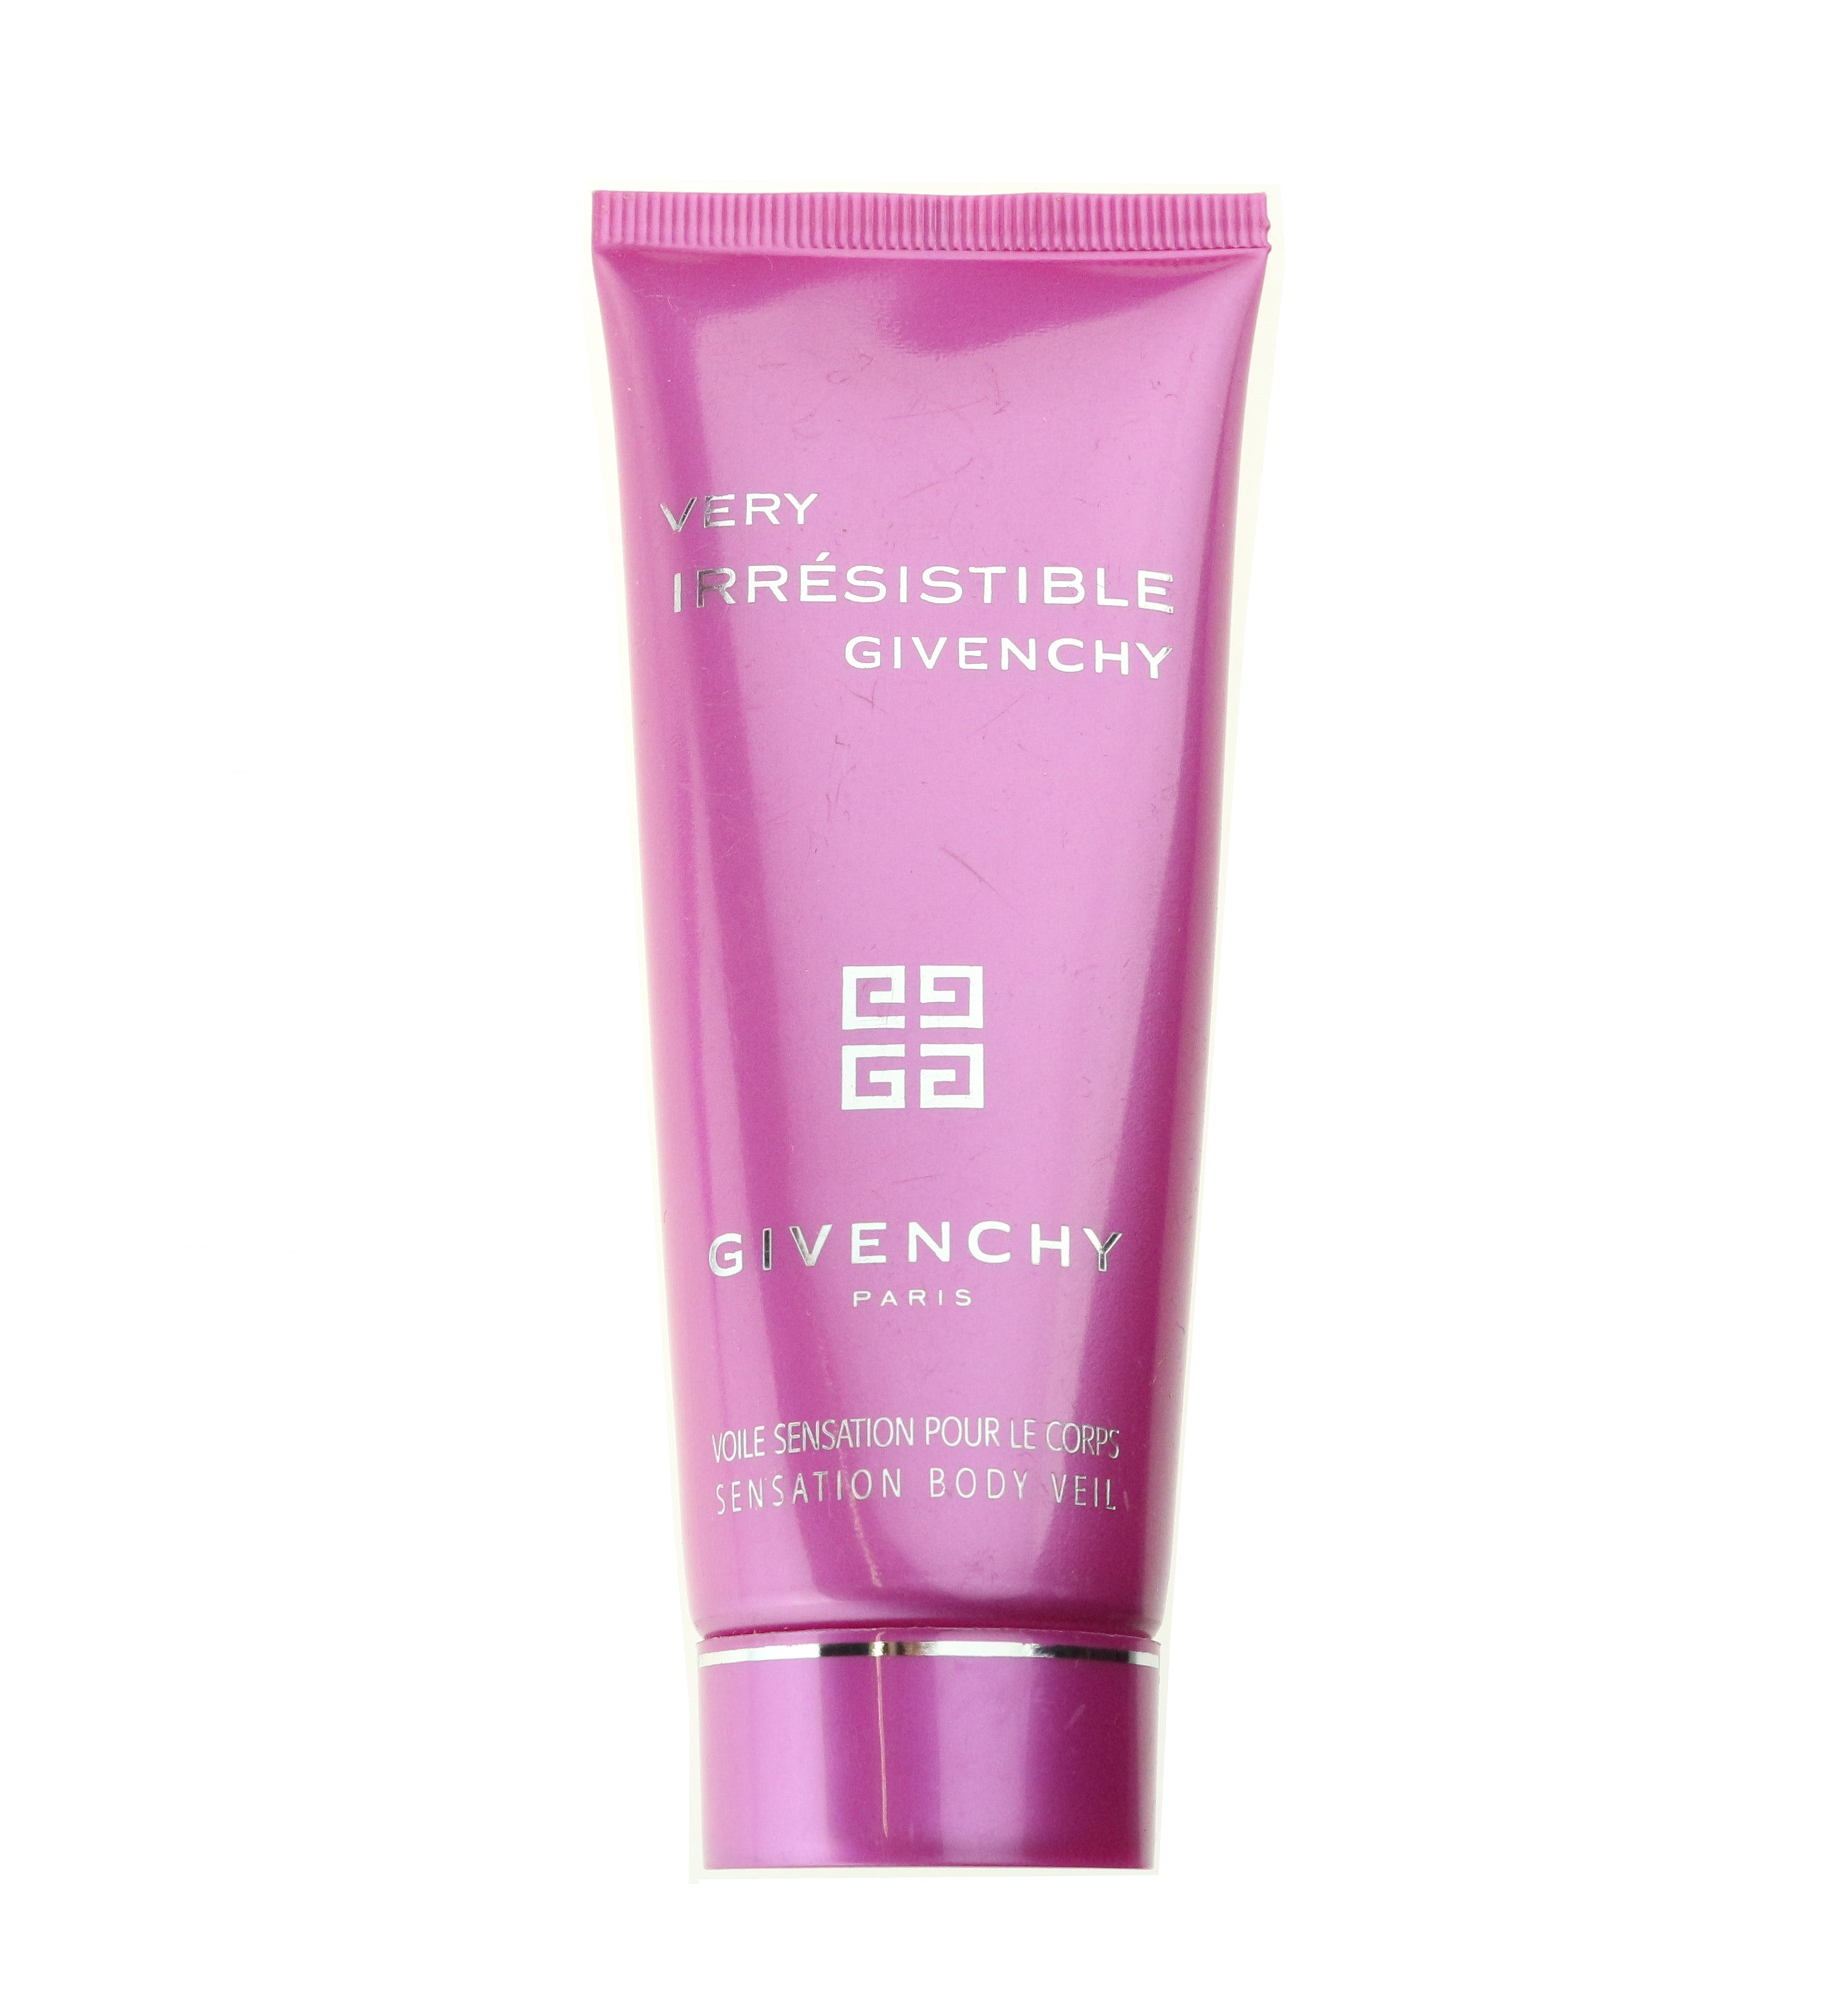 givenchy live irresistible body lotion